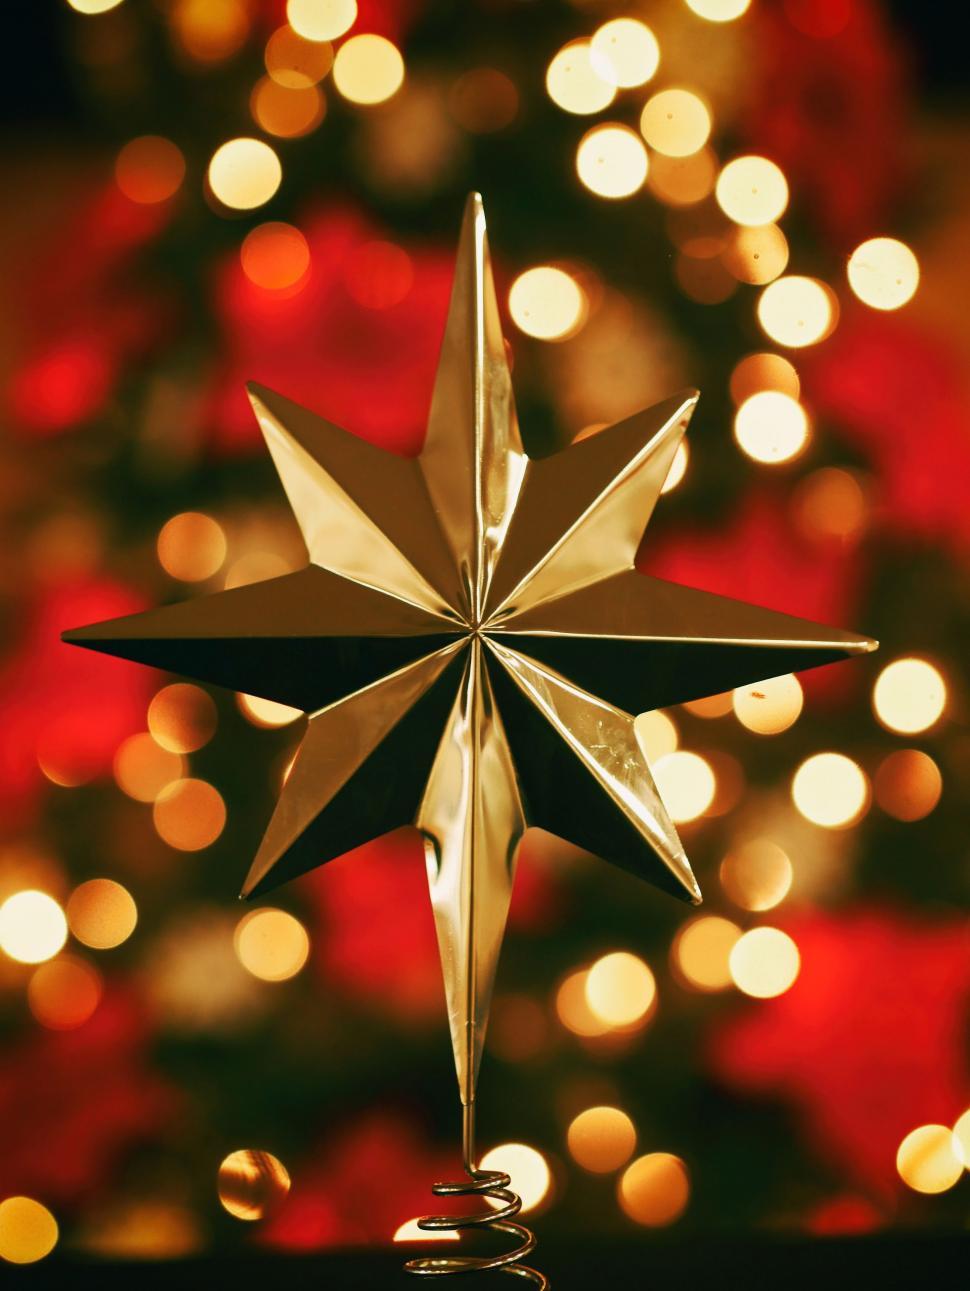 Free Image of Star Ornament in Front of Christmas Tree 